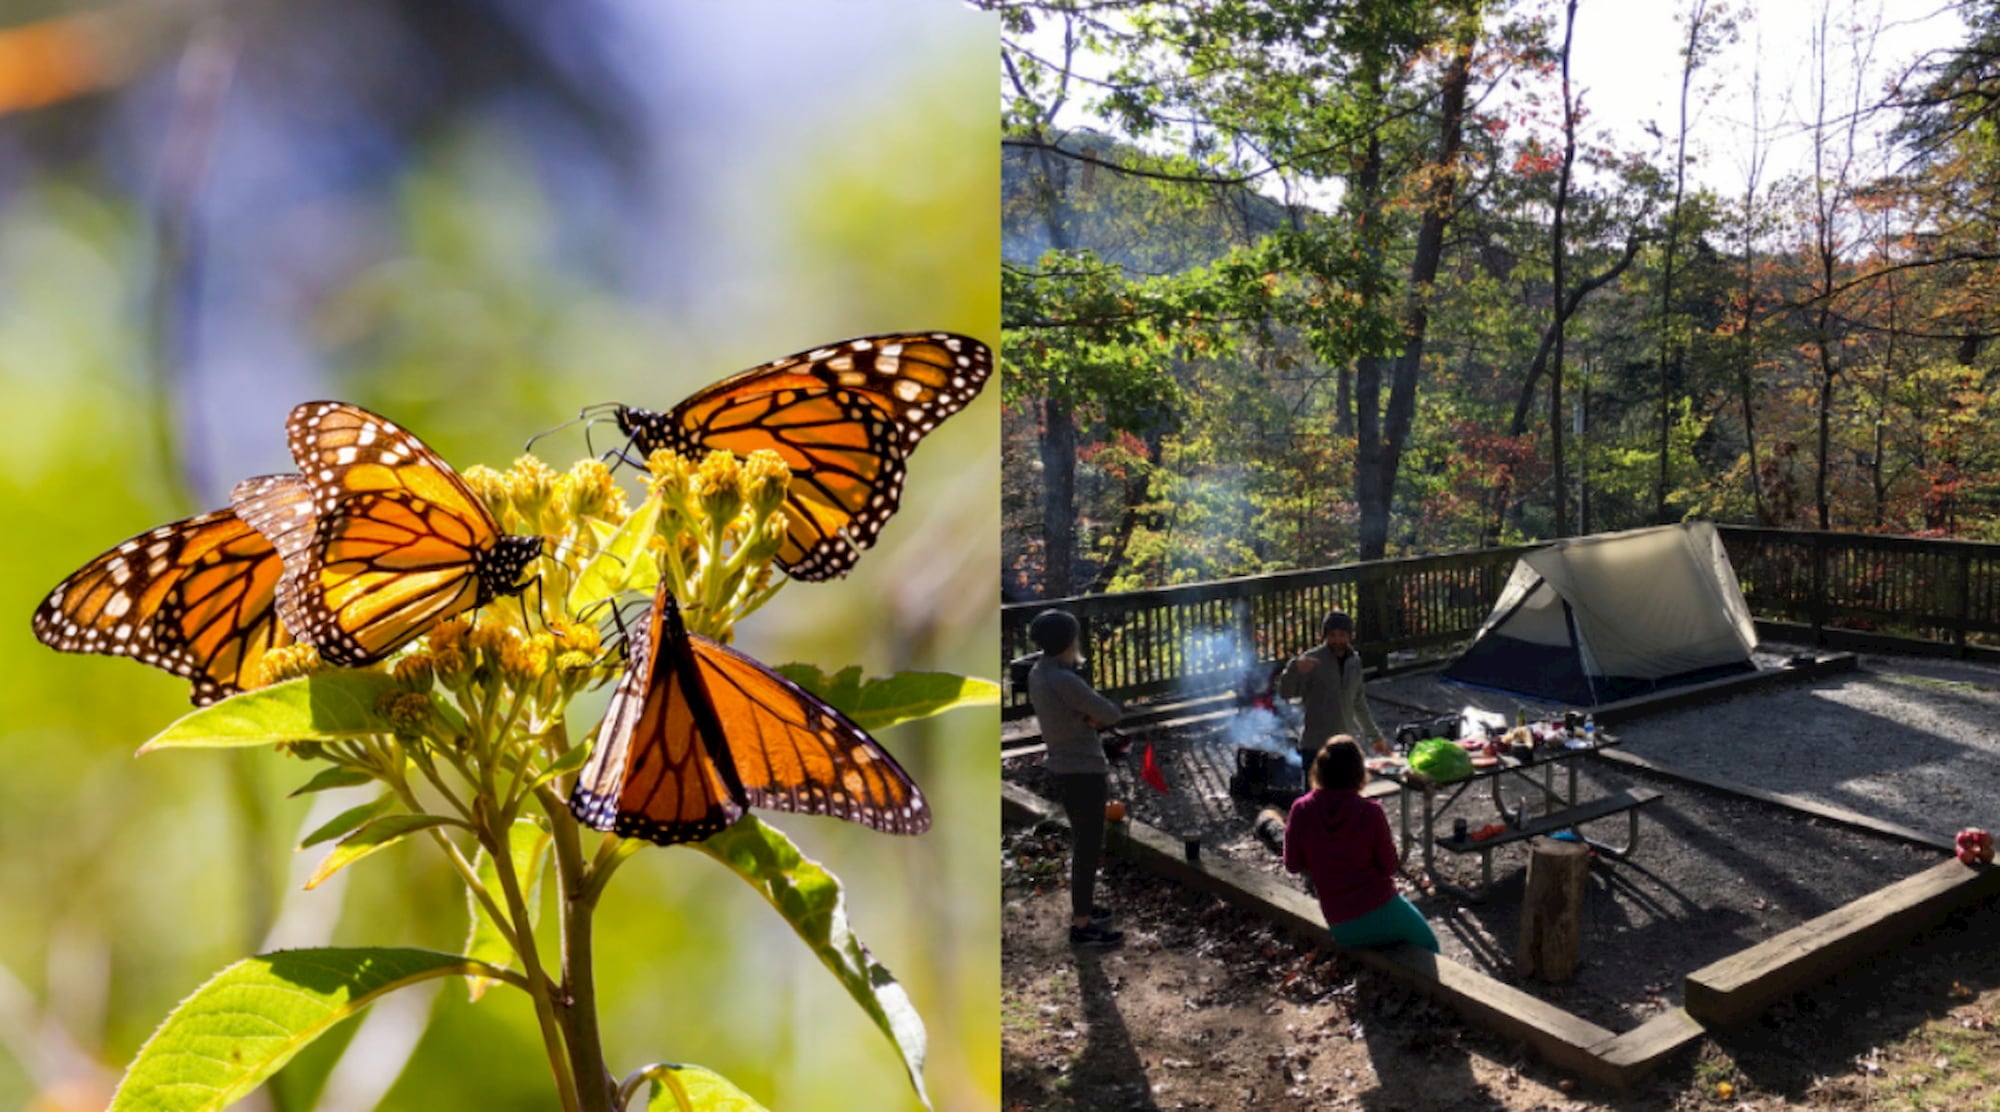 Left: monarchs flocking to a flowering plant. Right: campsite at Amicola state park.